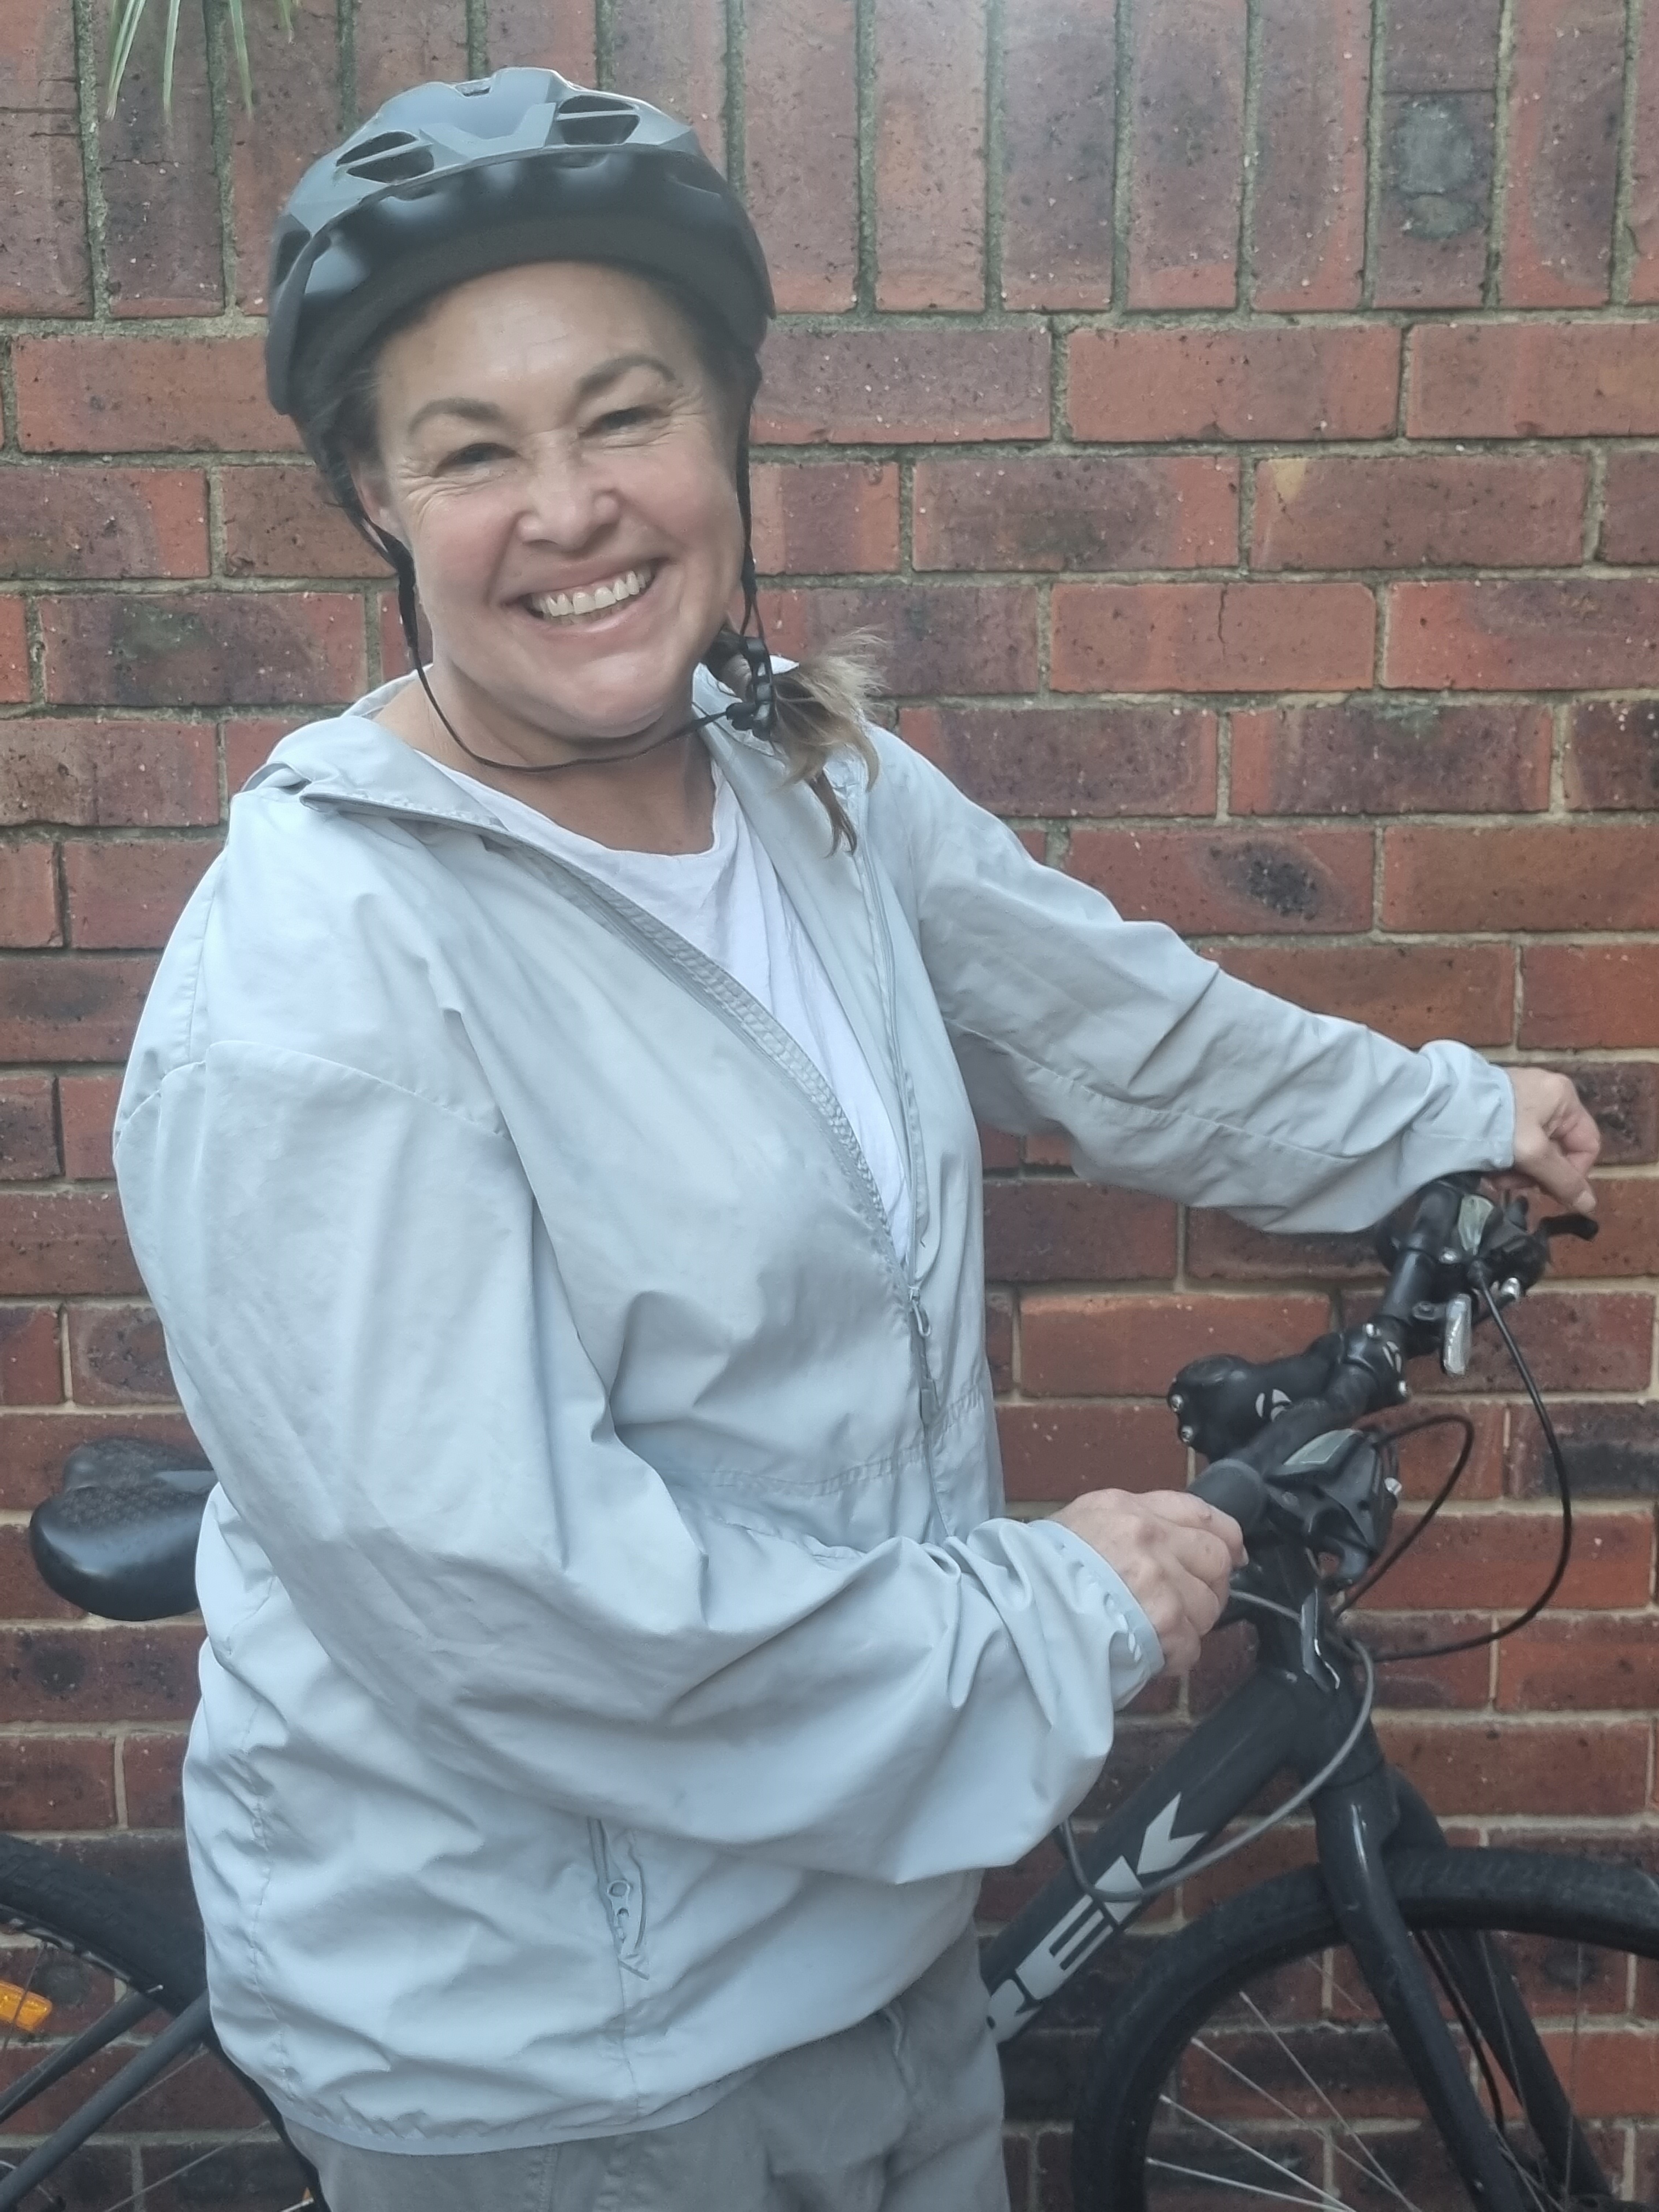 A woman in a bike helmet, holding her bike, grins at the camera.